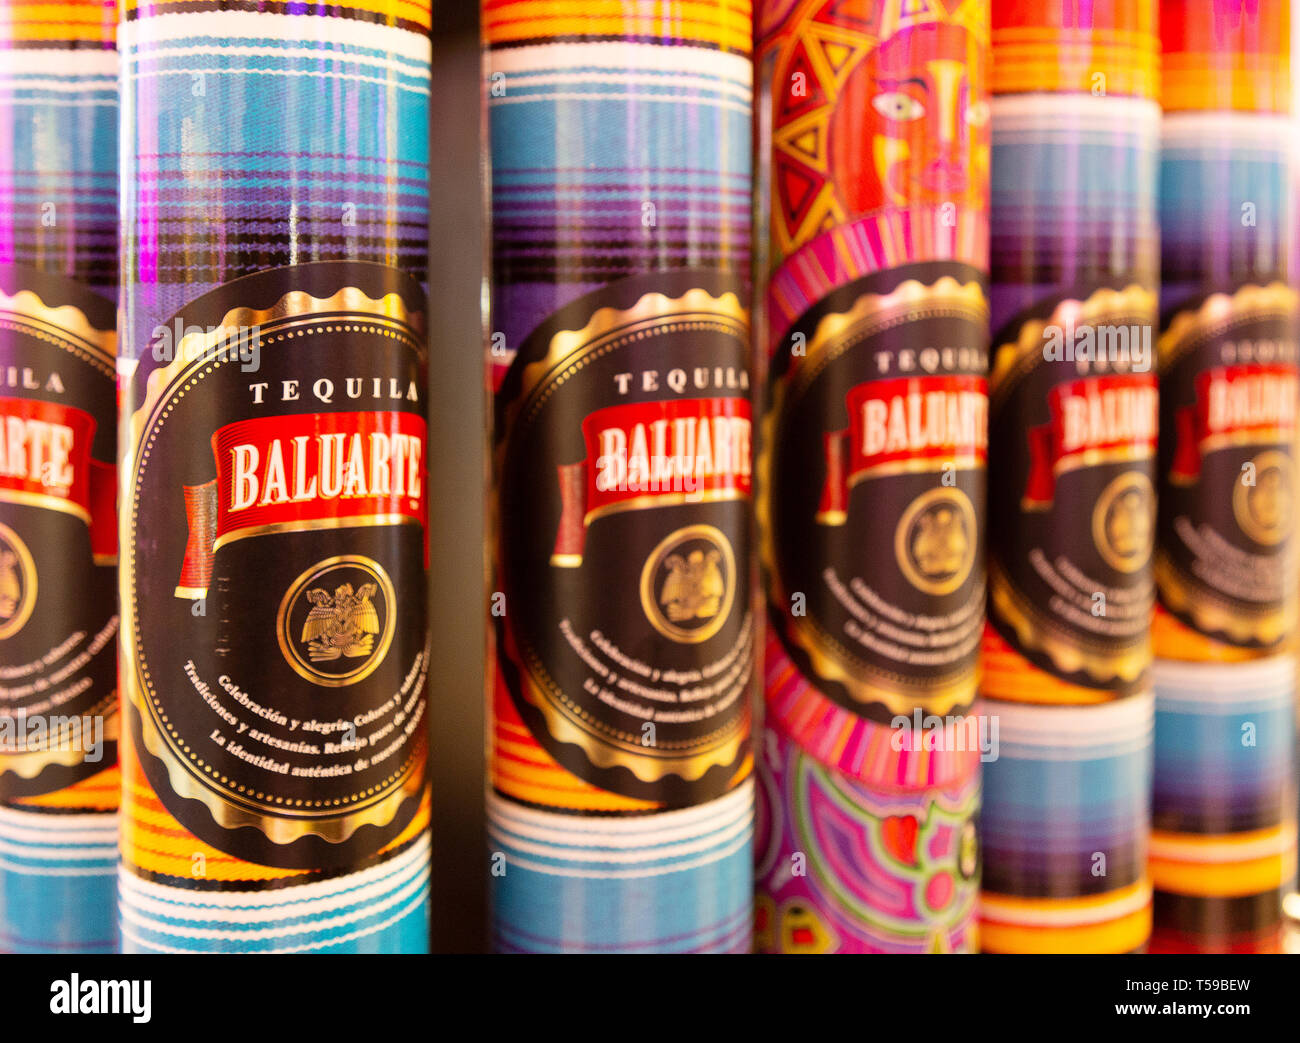 Close up of bottles of Baluarte Tequila on the shelf, Cancun Mexico Stock Photo